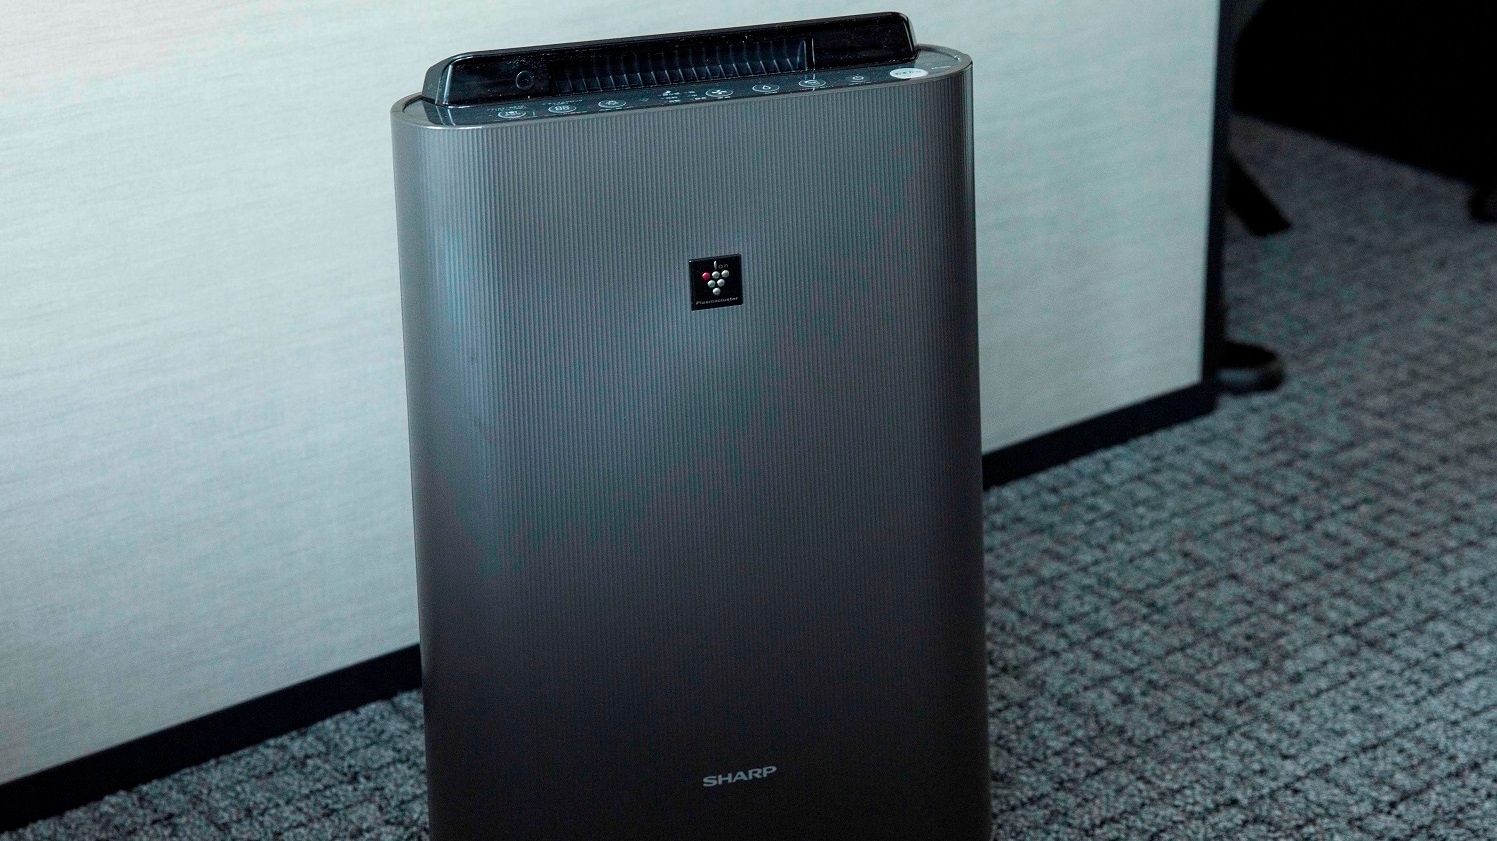 ◆ Plasmacluster air purifier with sharp humidification function ◆ All rooms are equipped